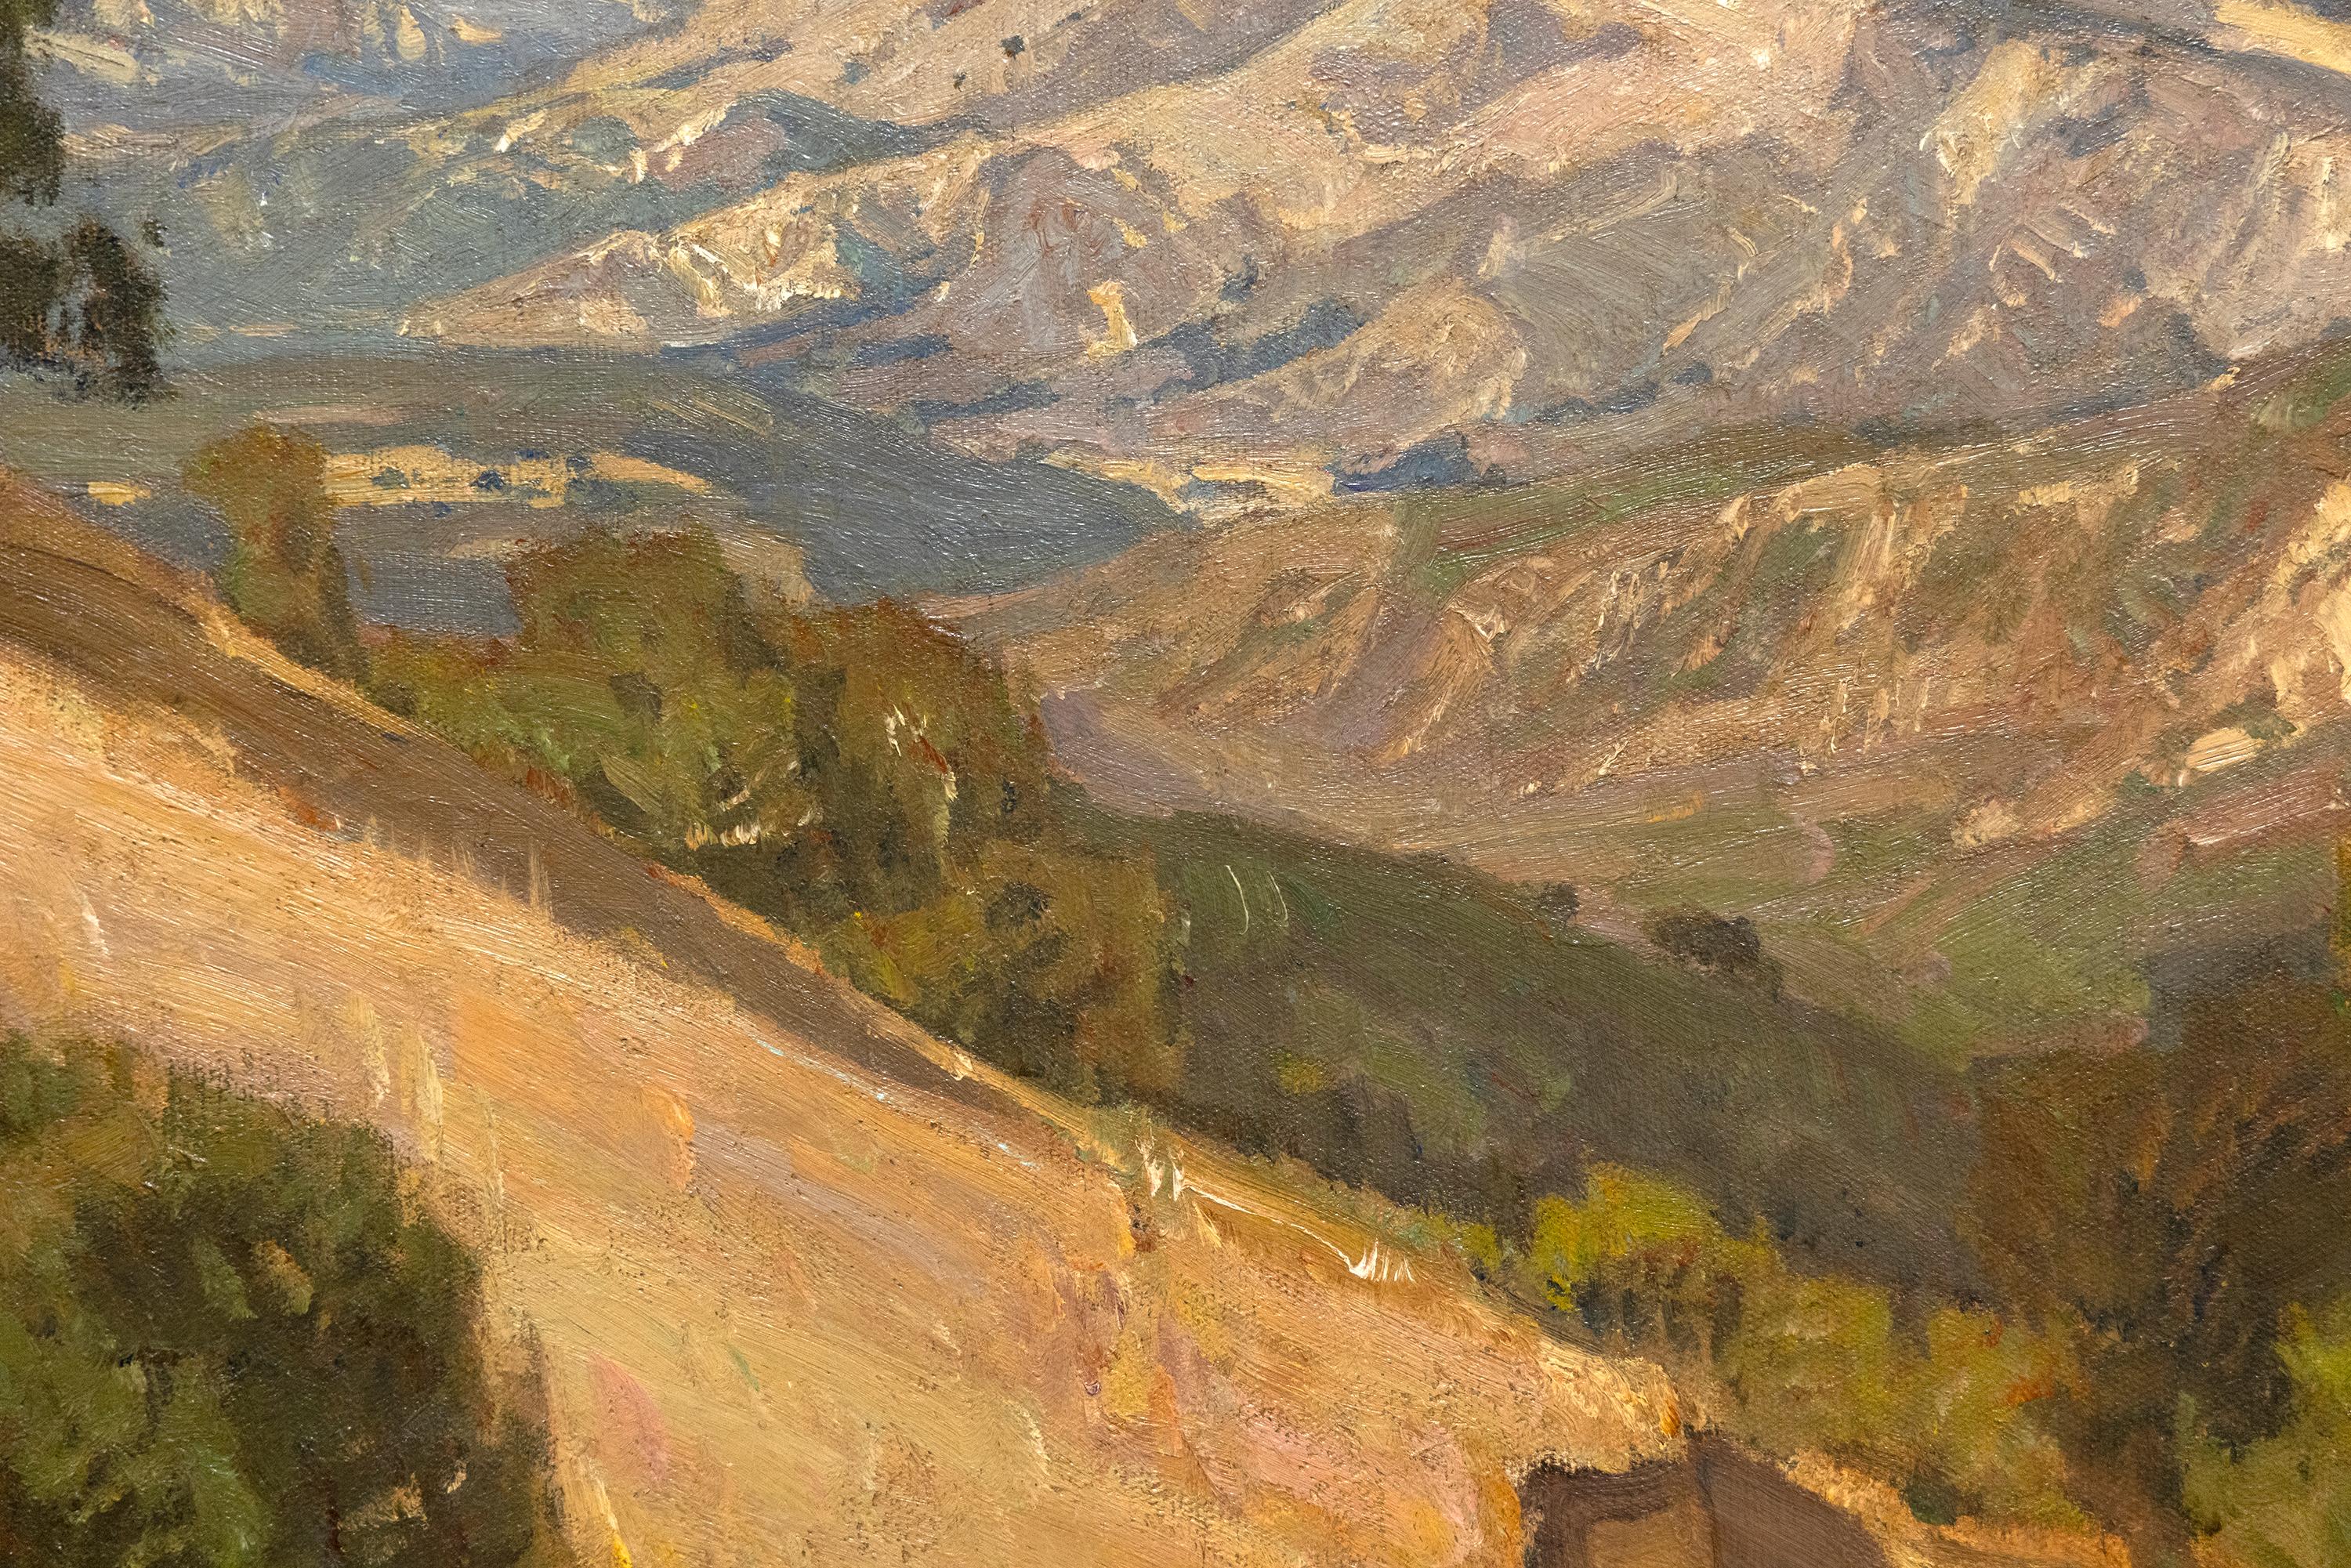 California Landscape - Brown Landscape Painting by William Wendt